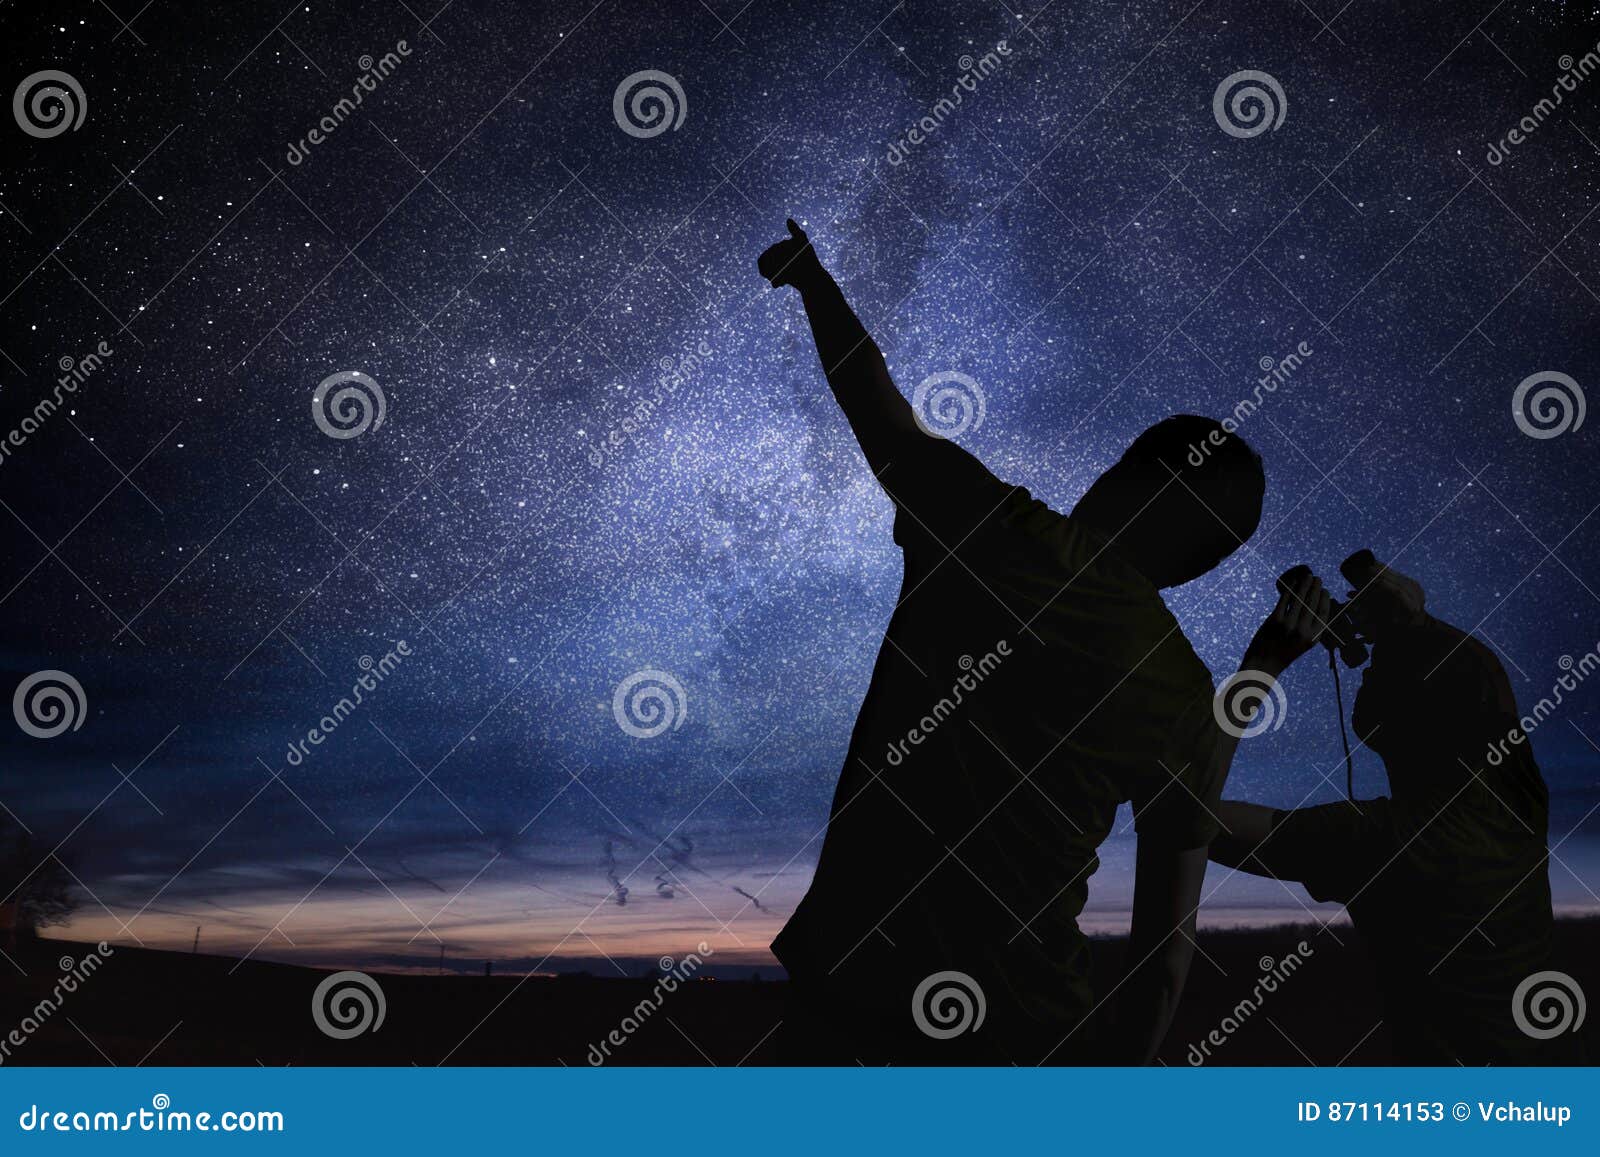 silhouettes of people observing stars in night sky. astronomy concept